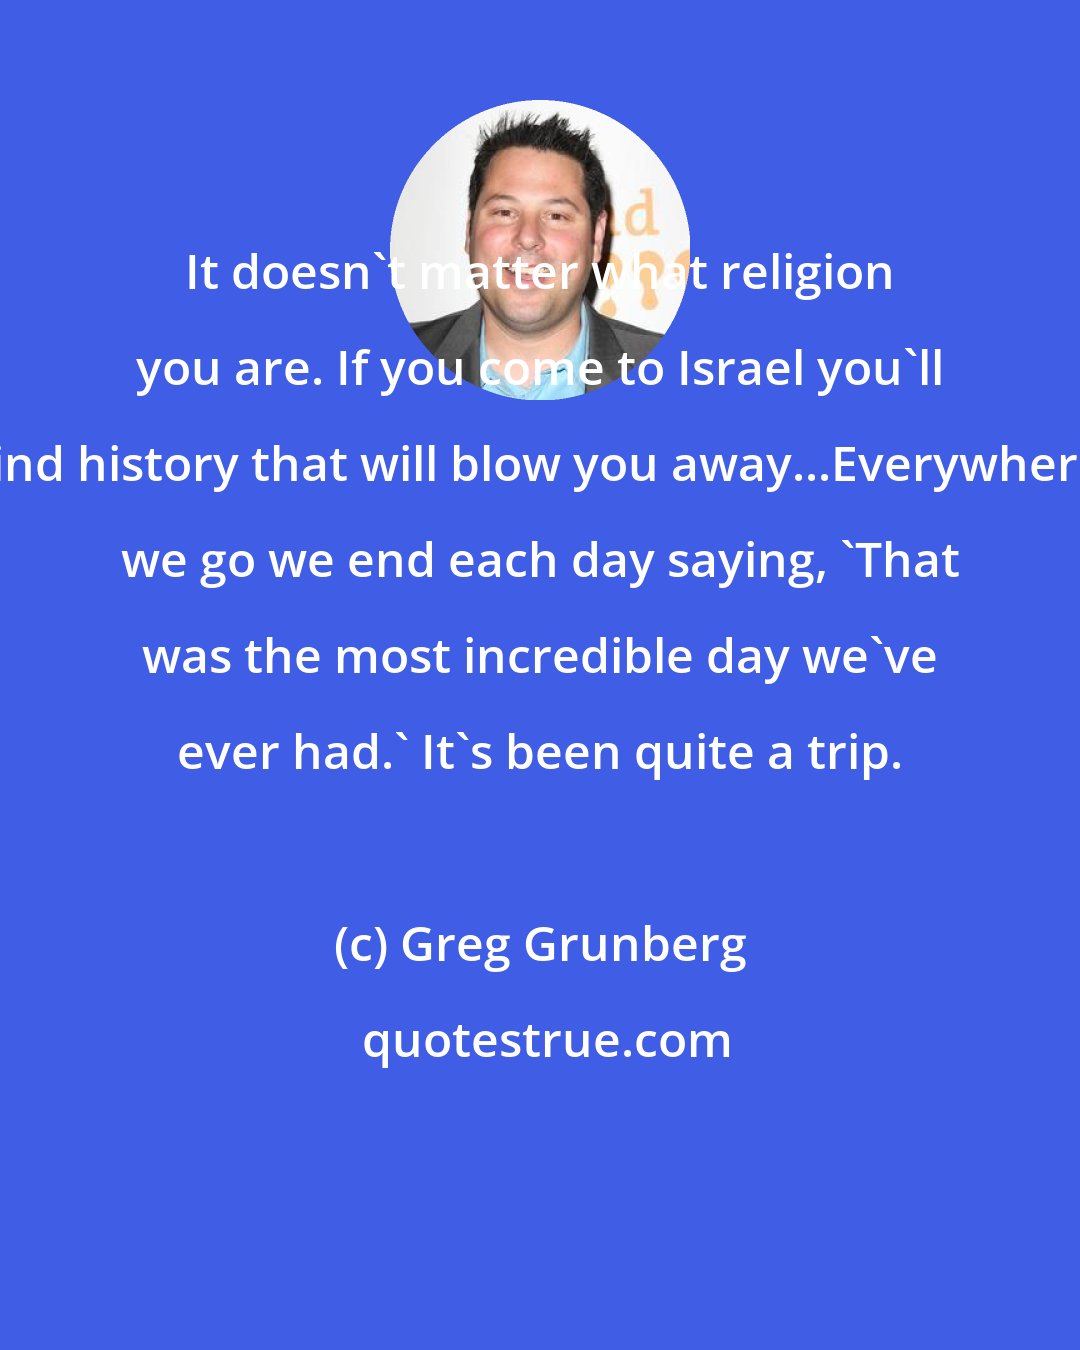 Greg Grunberg: It doesn't matter what religion you are. If you come to Israel you'll find history that will blow you away...Everywhere we go we end each day saying, 'That was the most incredible day we've ever had.' It's been quite a trip.